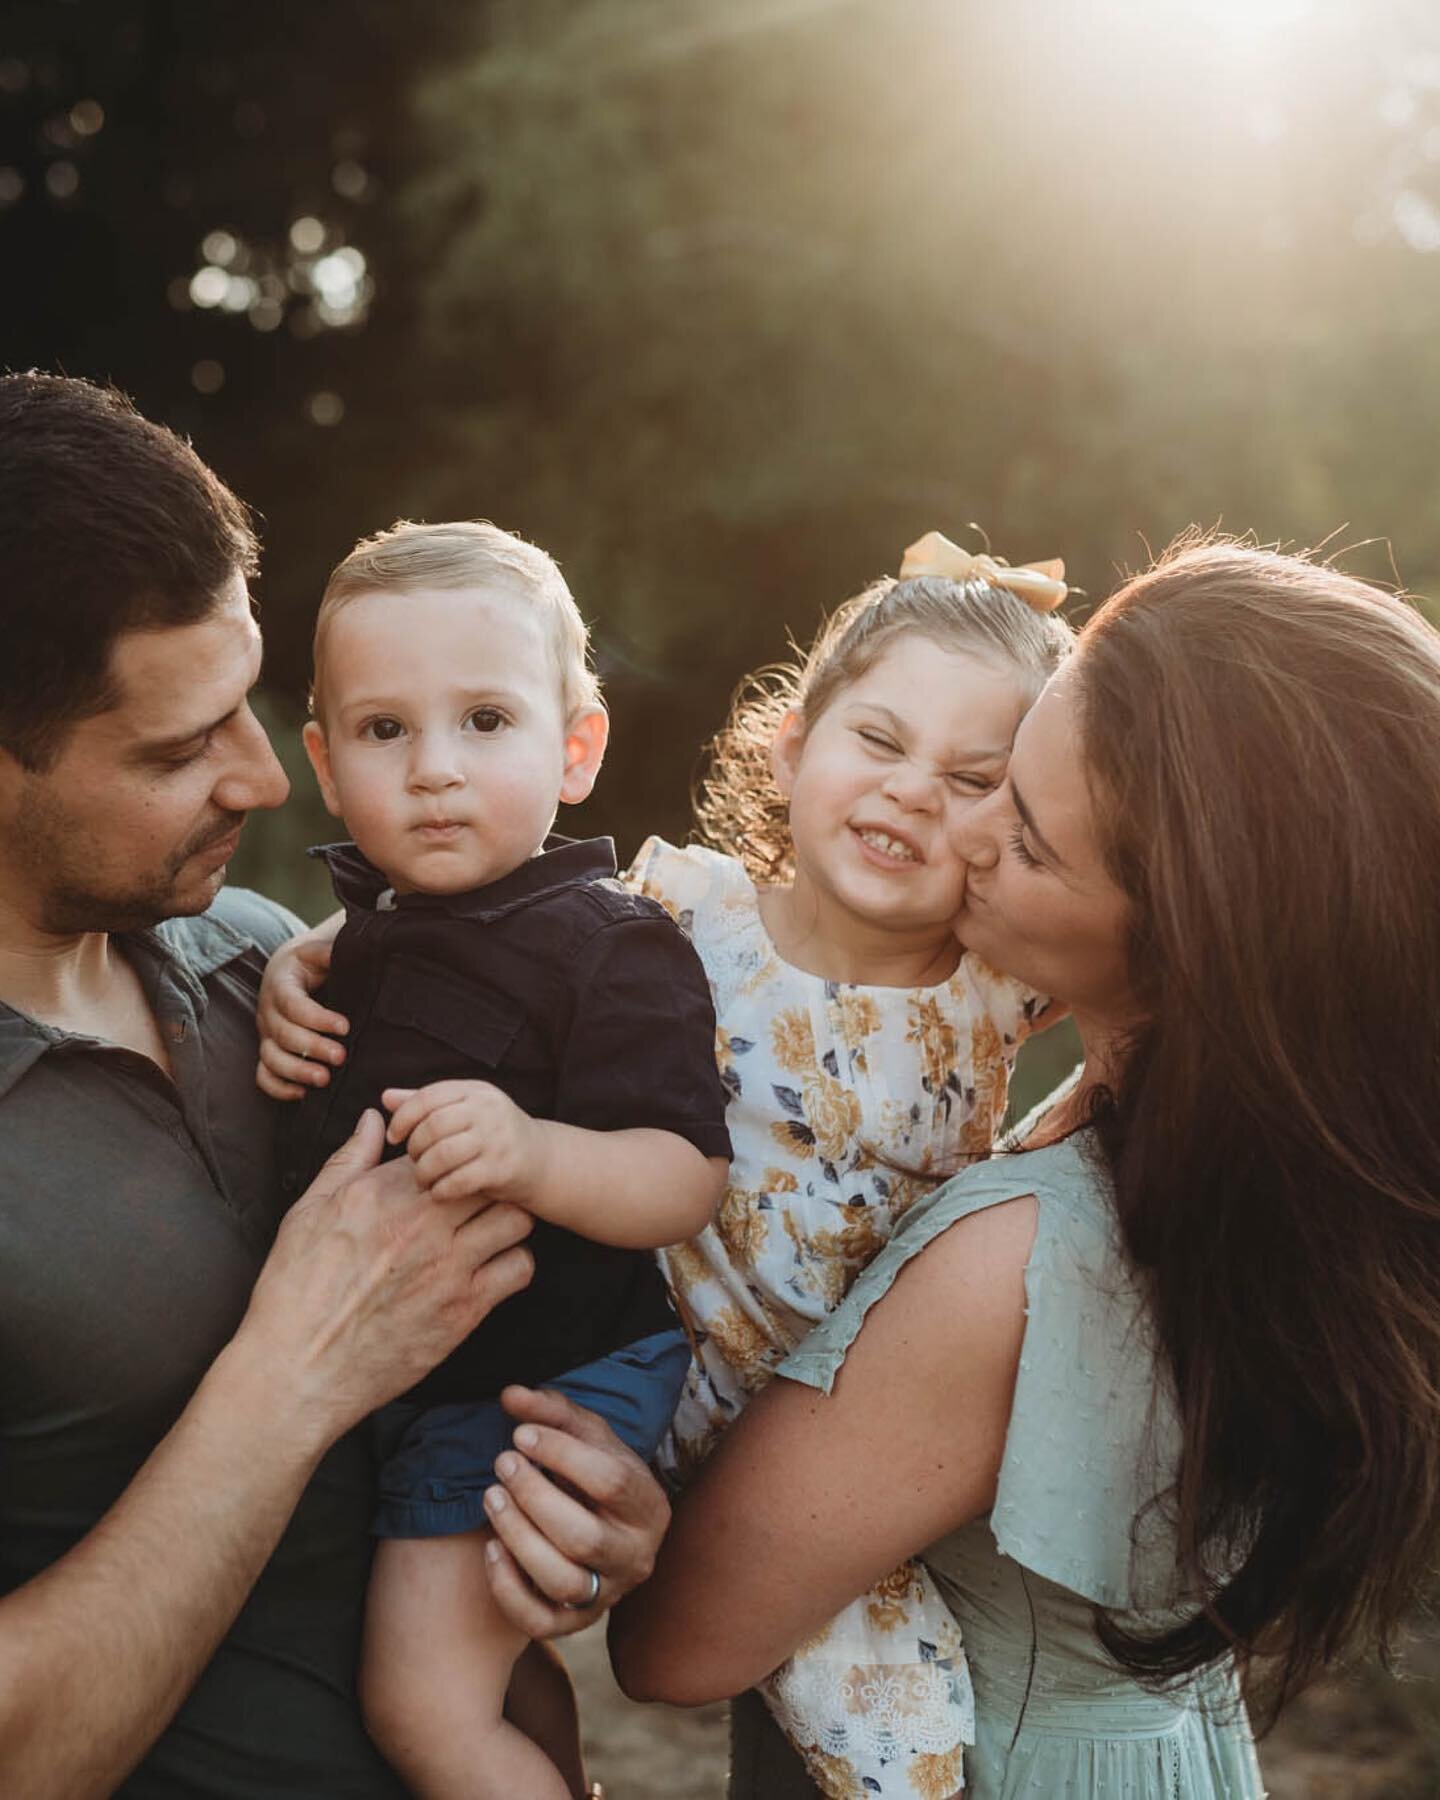 I&rsquo;m in LOVE with this family&rsquo;s gallery, and I haven&rsquo;t even finished editing yet!

#jwbrownphotography⠀ #lifestylefamilyphotography #lifestylephotography #lifestylephotographywithkids #ctfamilyphotographer #ctfamilyphotography #summe